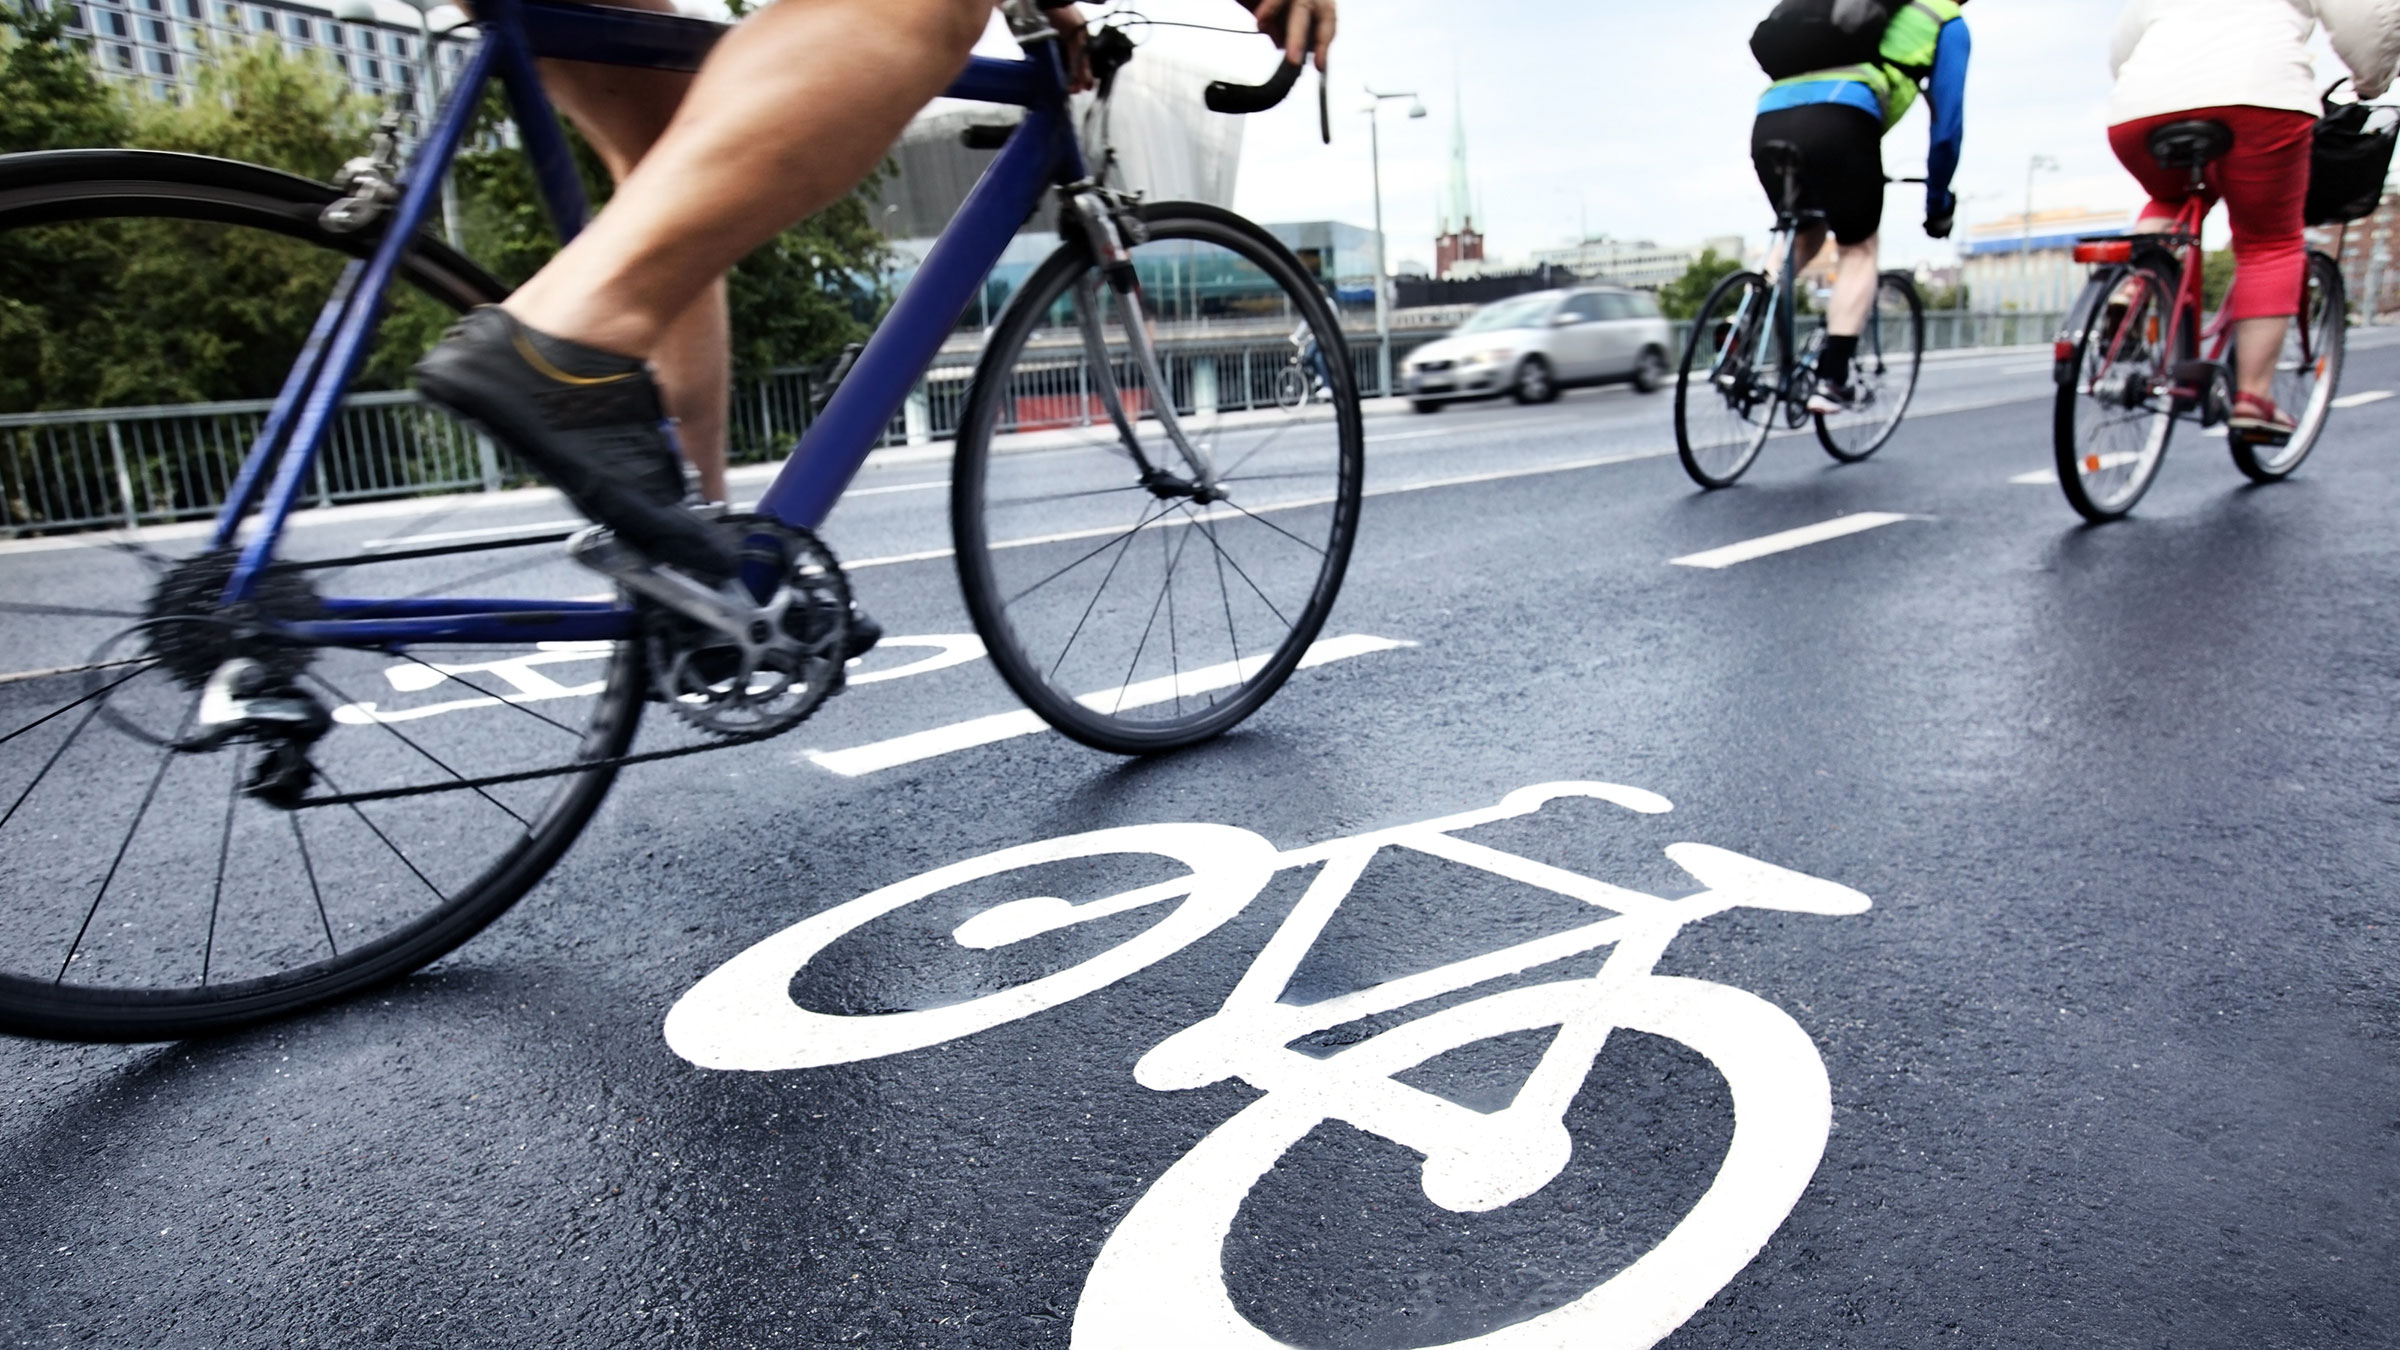 The 3 new regulations of the DGT that cyclists must comply with if they want to avoid fines